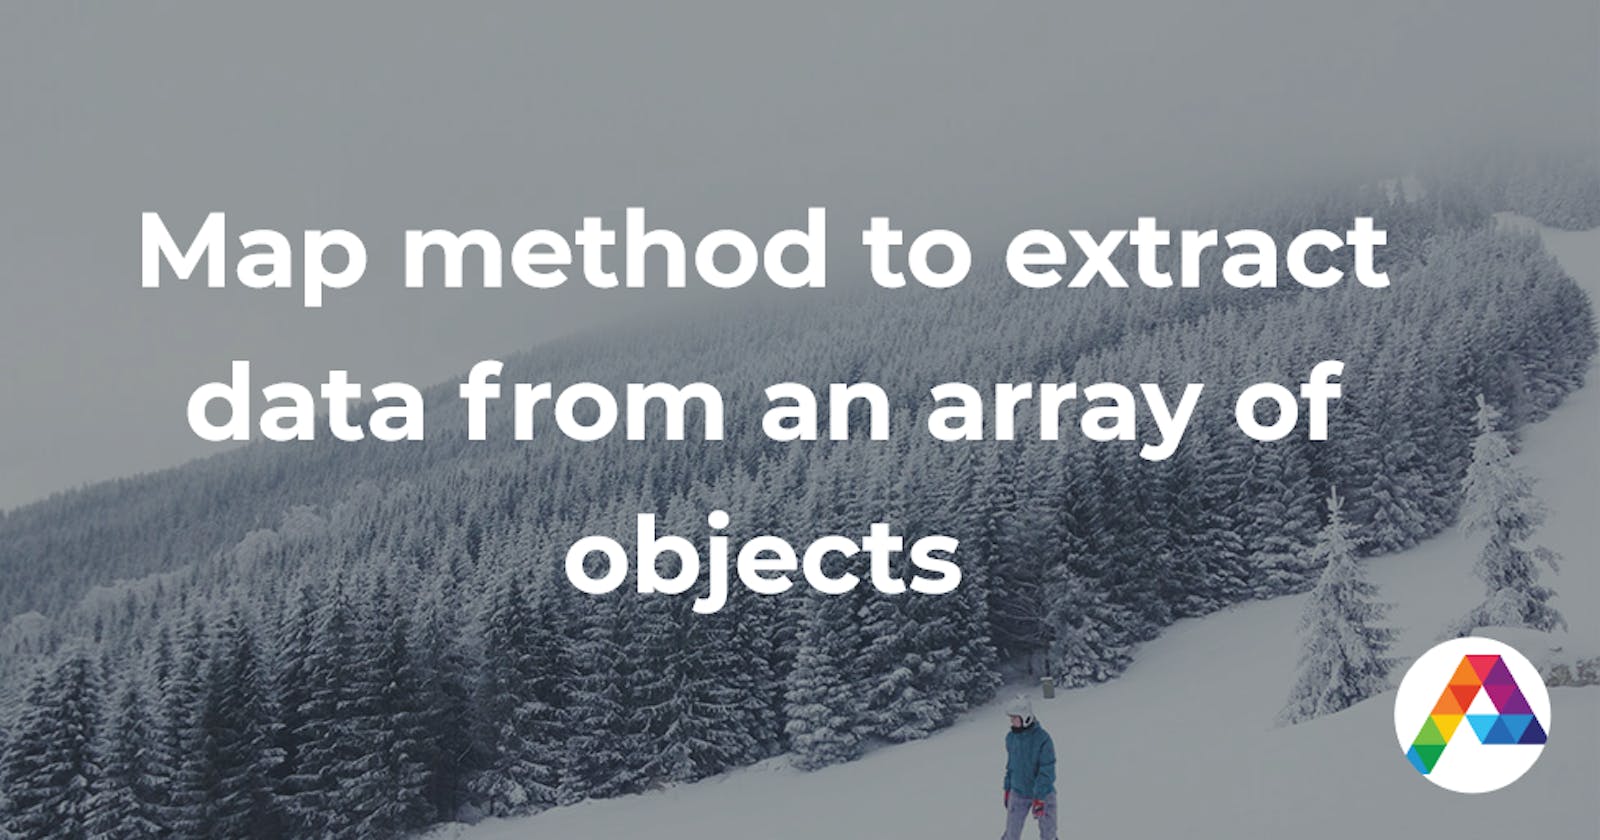 Map method to extract data from an array of objects